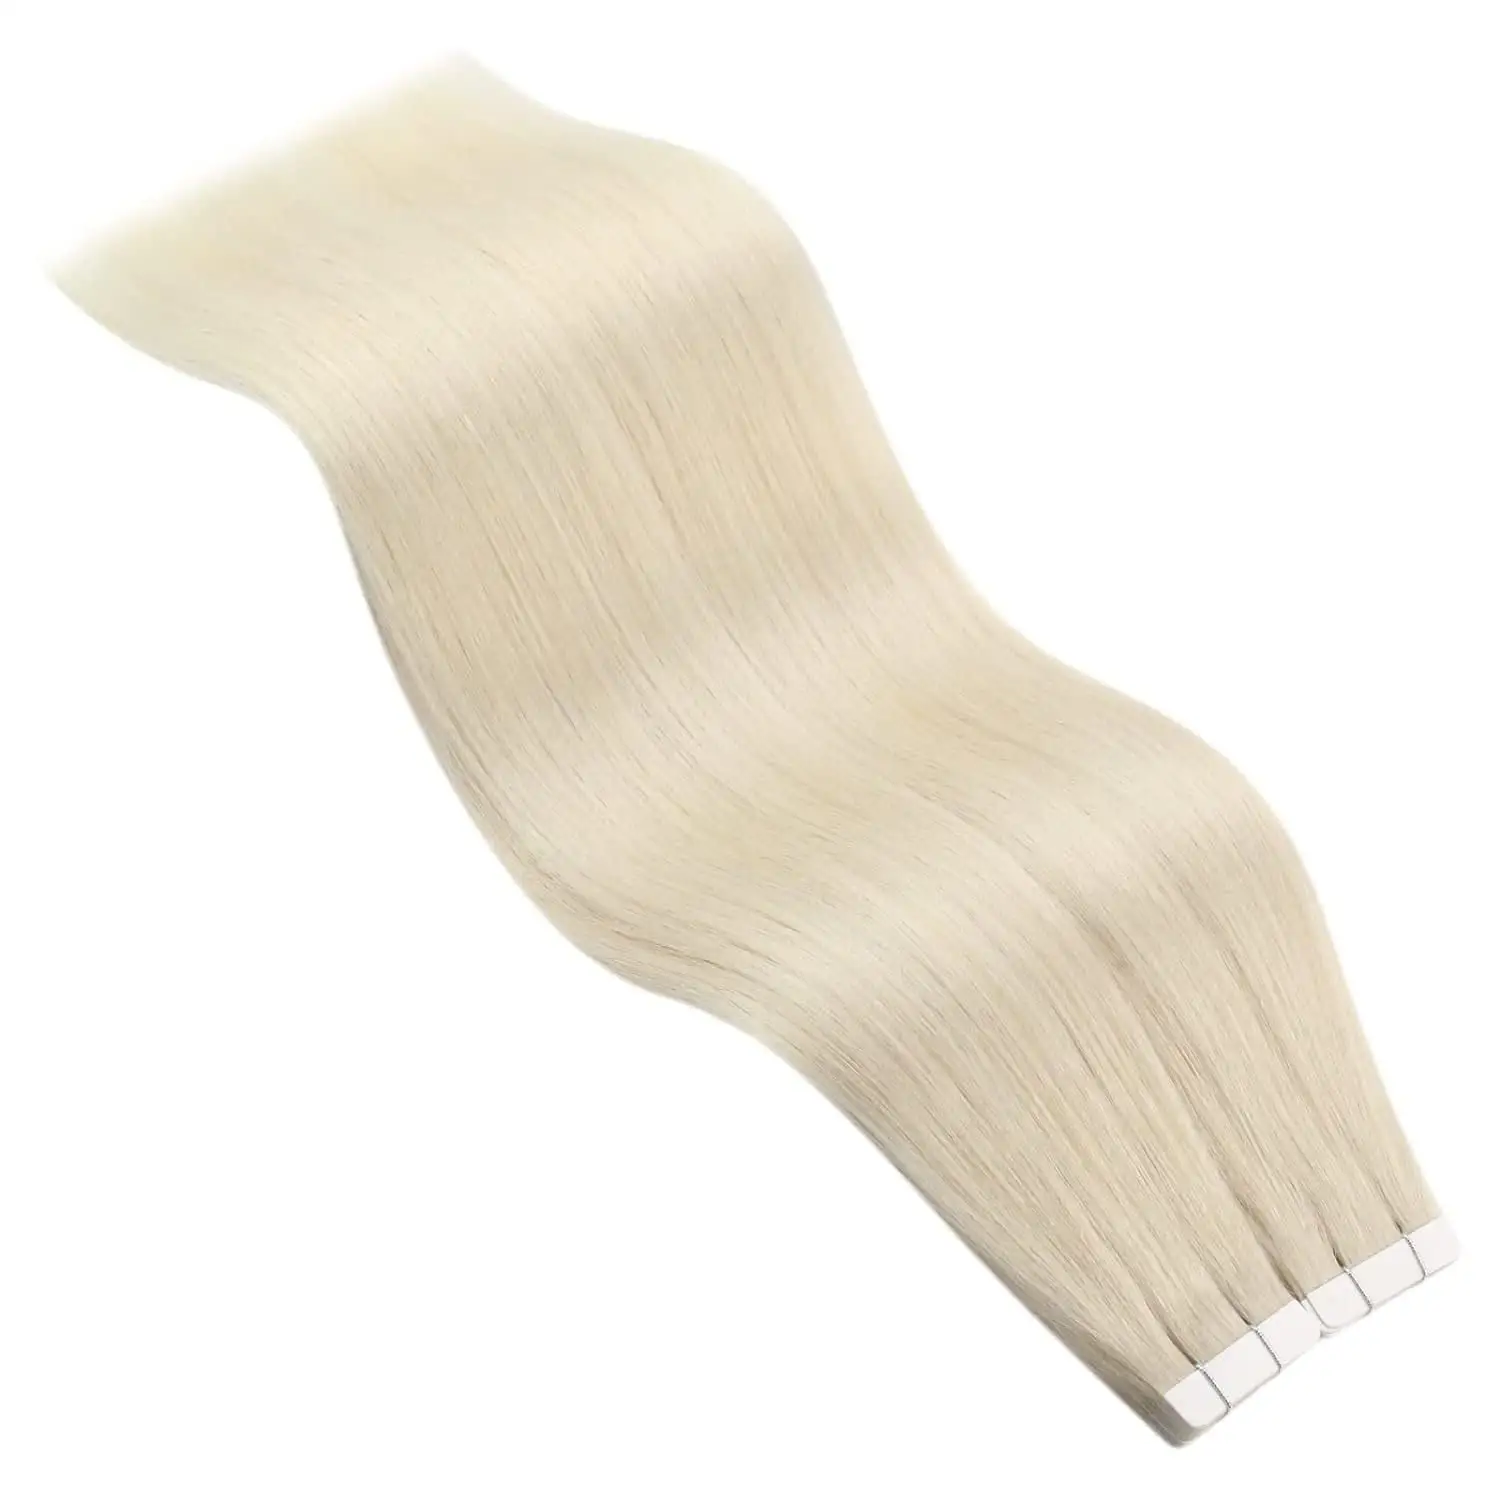 Hot Sale No Tangle And No Shedding Russian Remy Cuticle Intact Human Hair Tape In Hair Extension Offer Sample Popular Hair